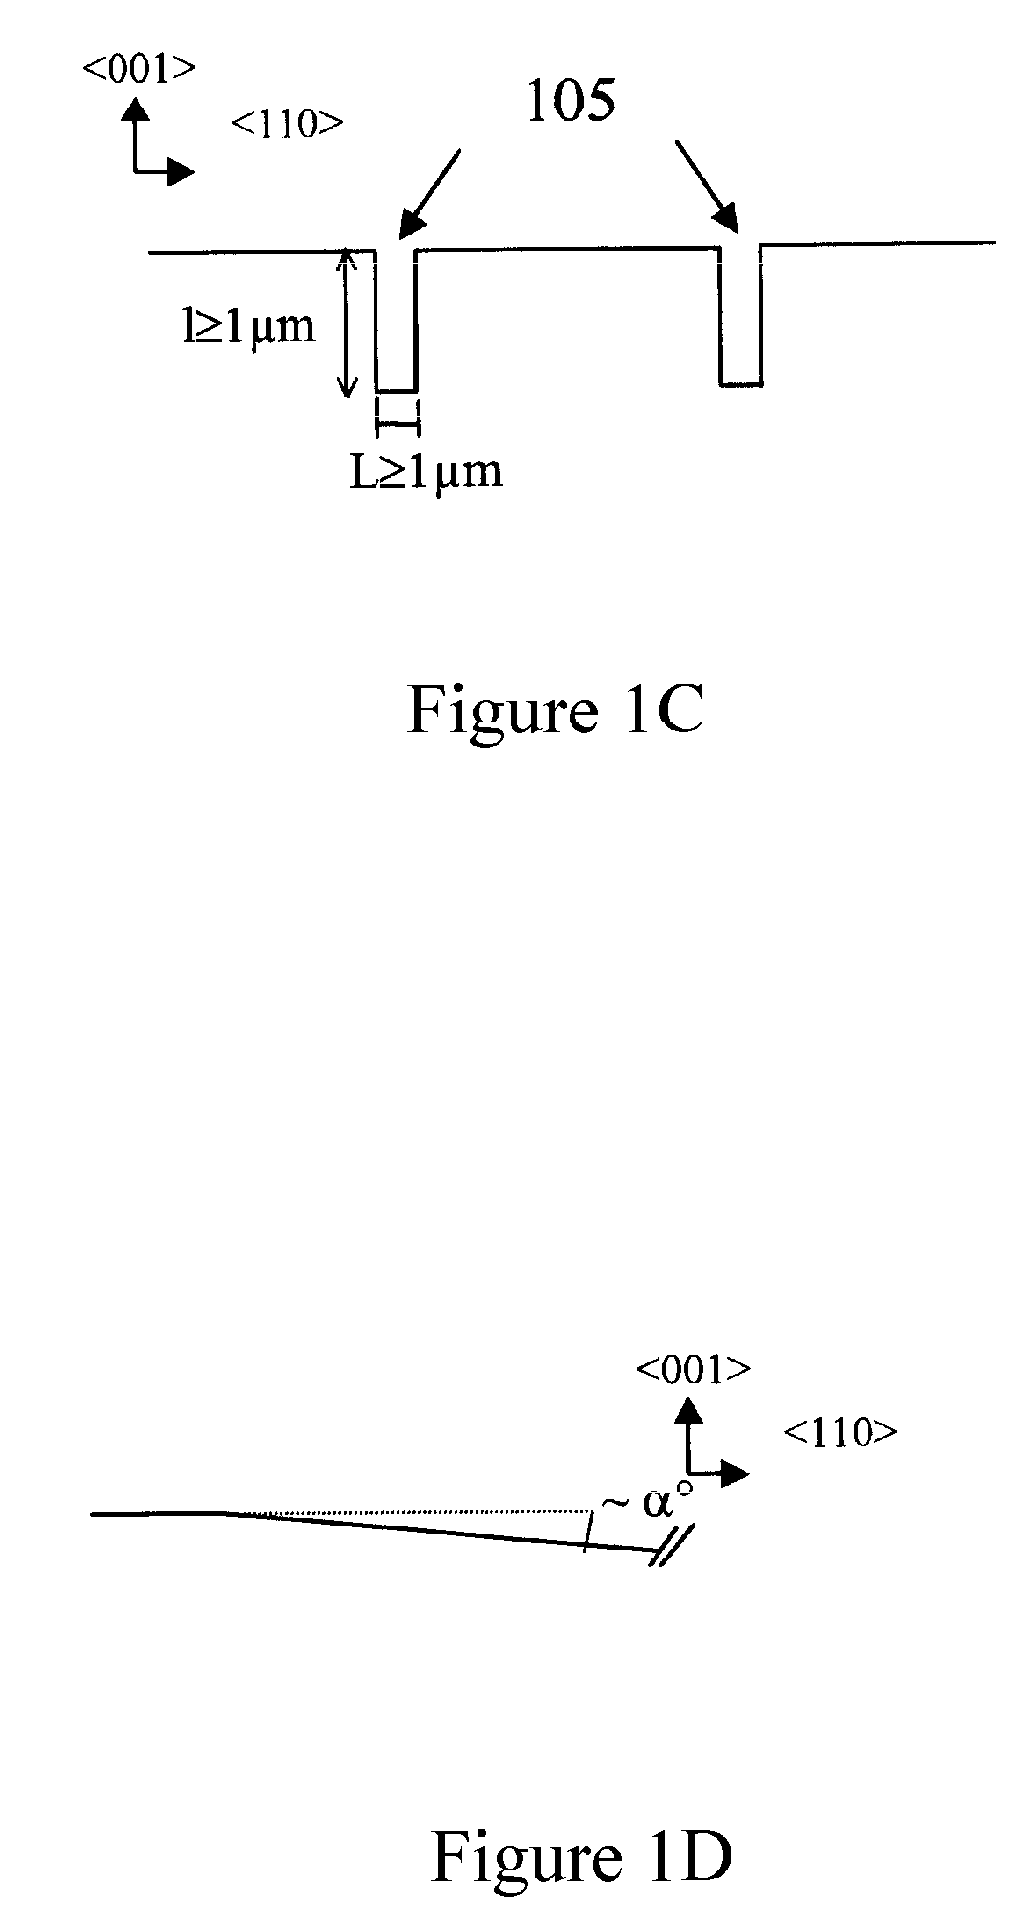 Process for integrating a III-N type component on a (001) nominal silicium substrate